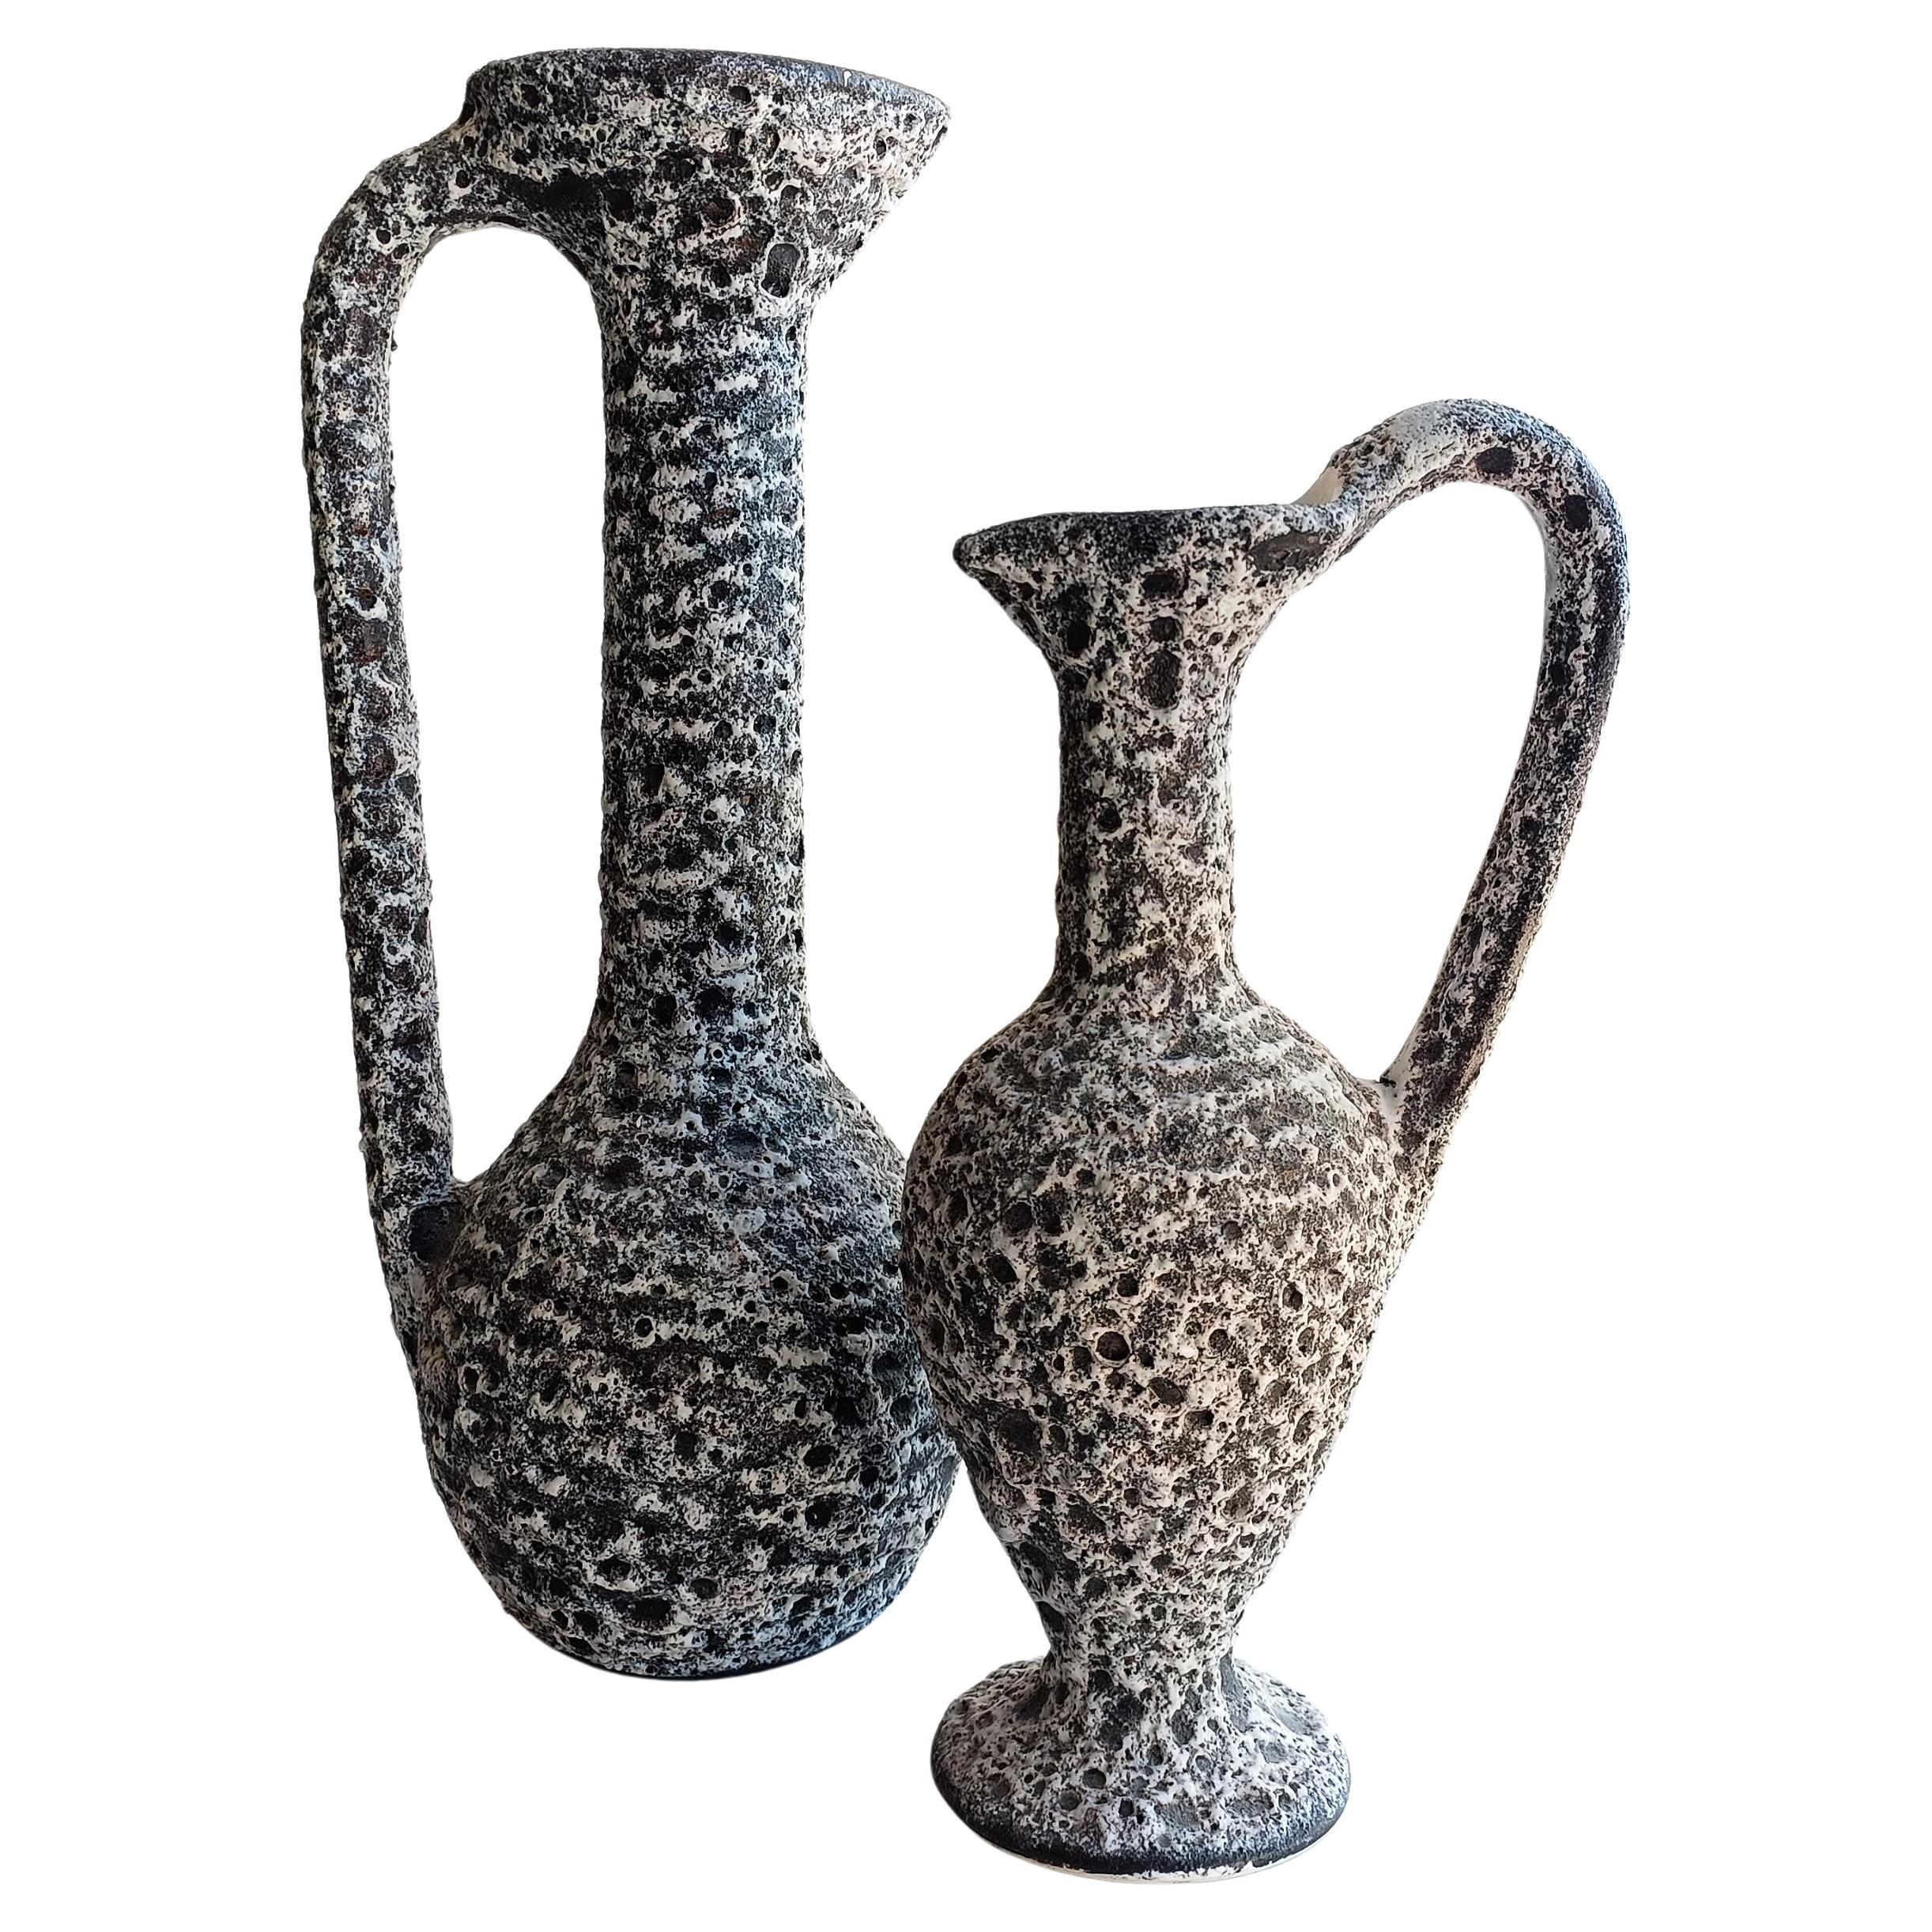 Glazed Vintage French Vallauris Set of Two Ceramic Pitchers Signed Alain Rufas, 1960s For Sale